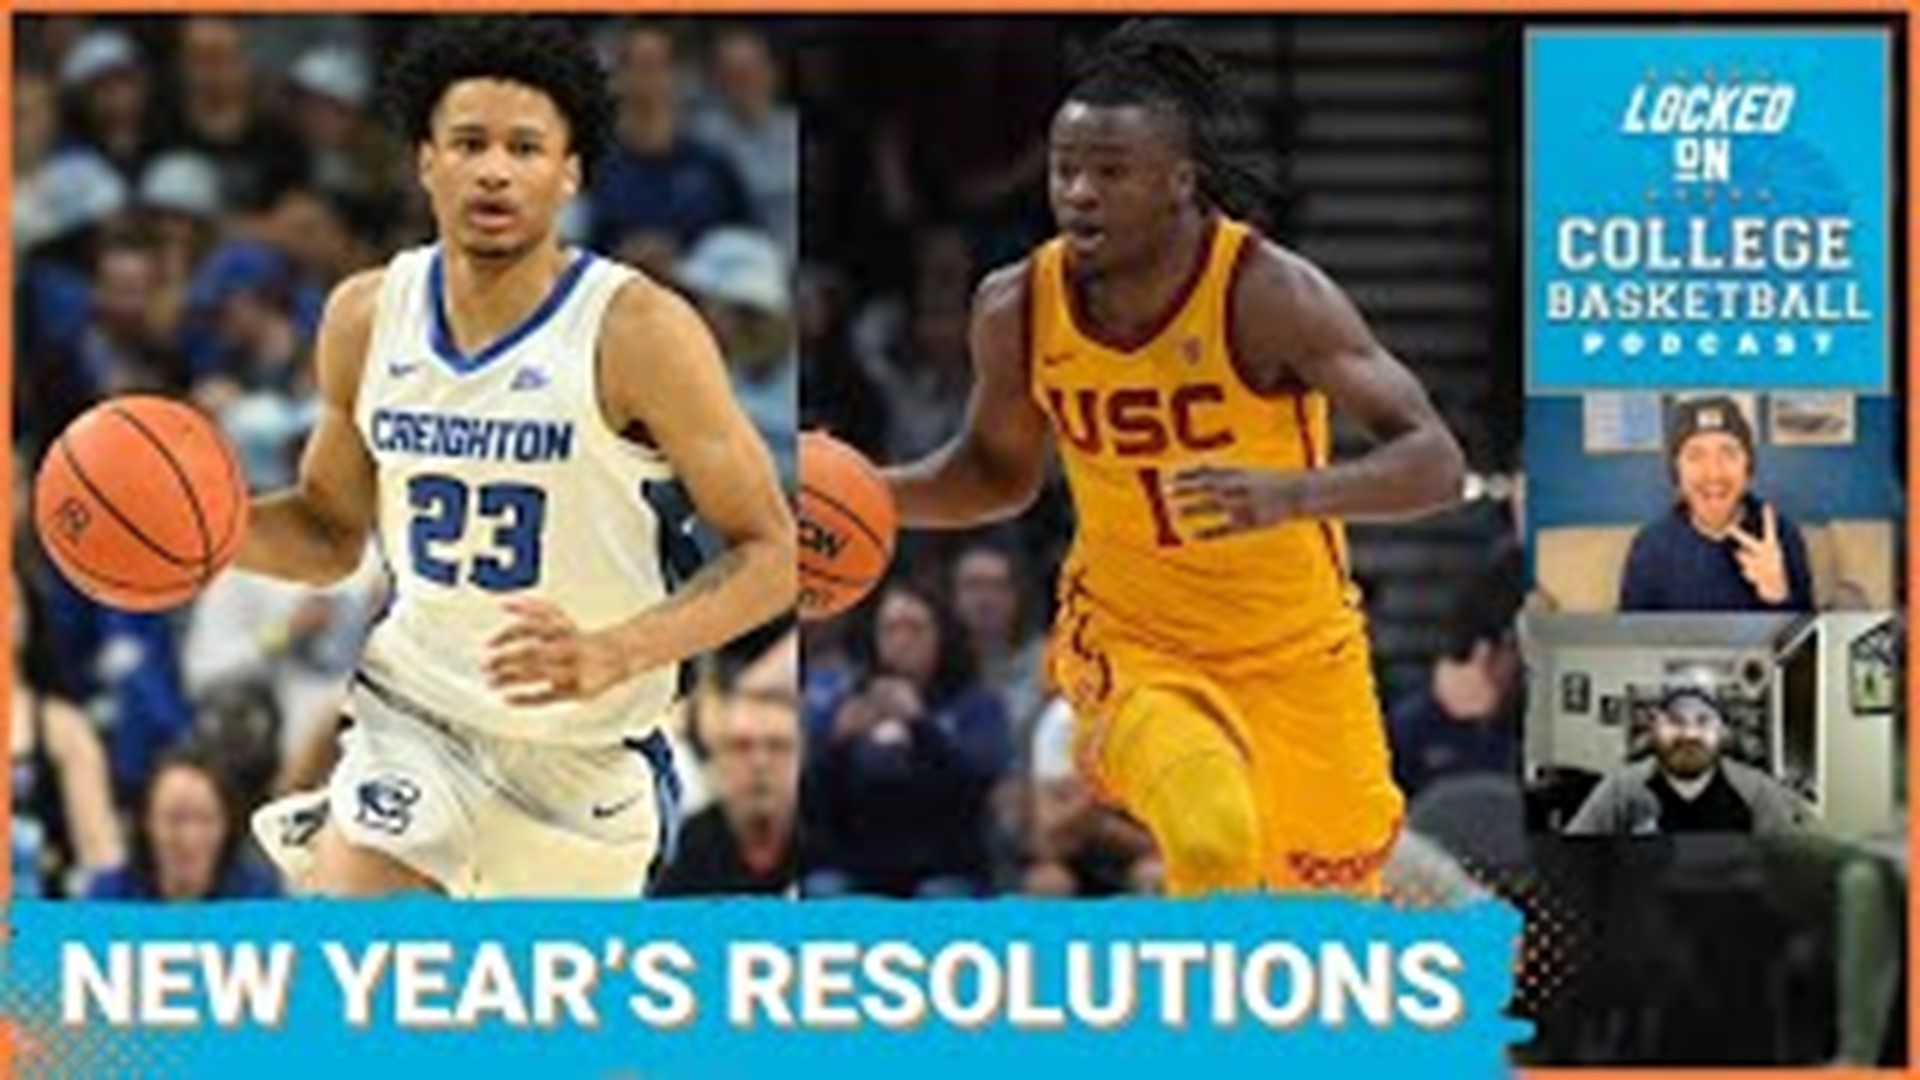 New Year’s weekend is upon us and that means it’s time to help some college basketball teams make New Year’s resolutions.